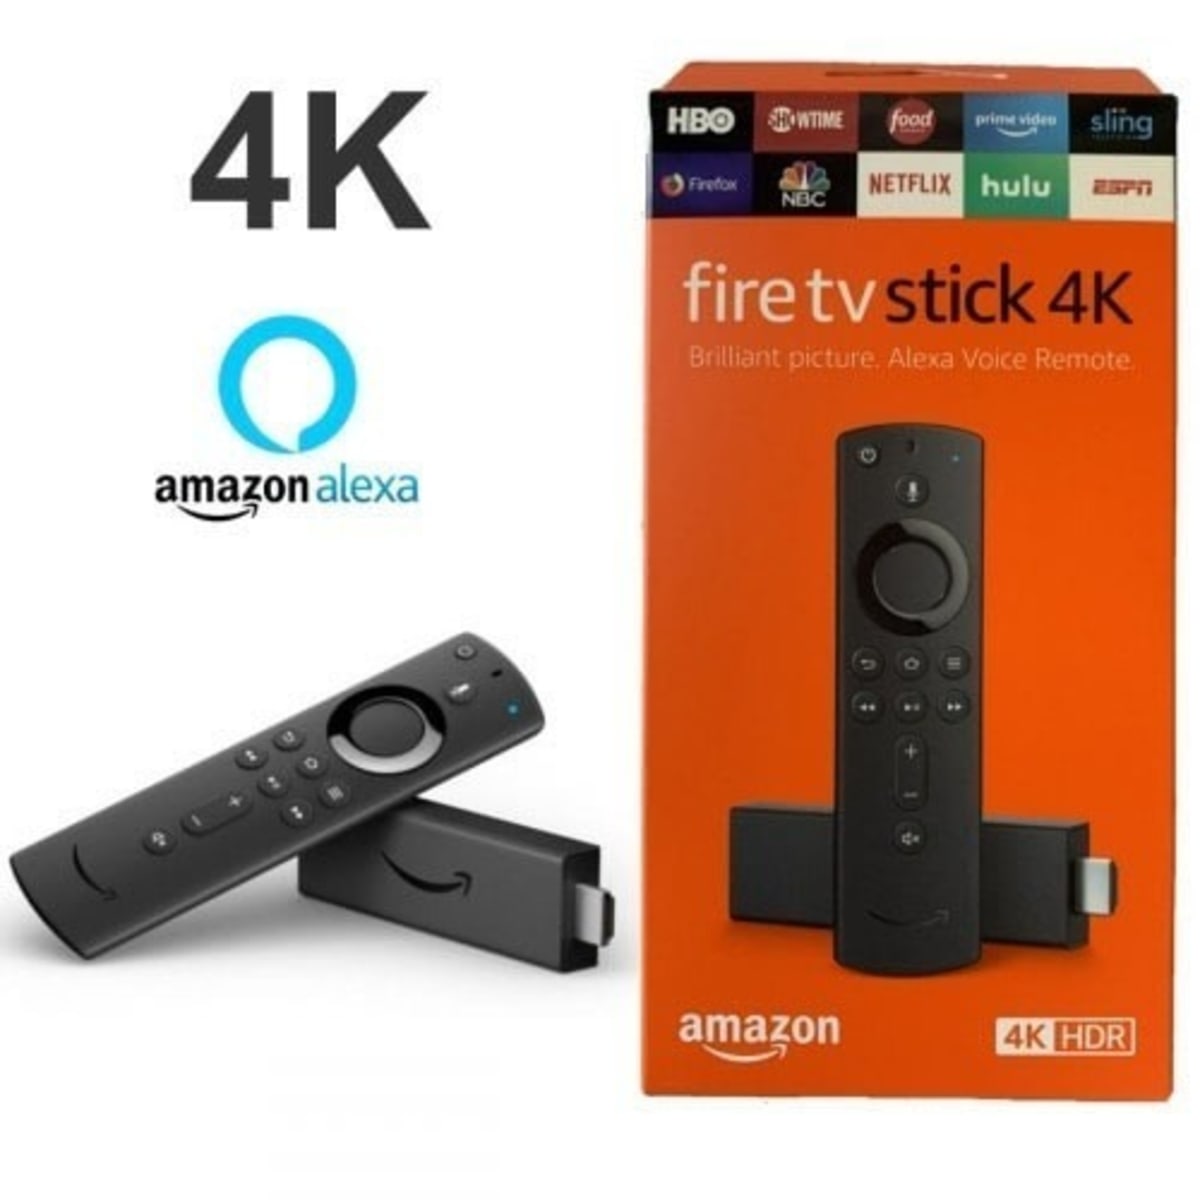 Fire Tv Stick 4k Streaming Media Player - With Alexa Voice Remote